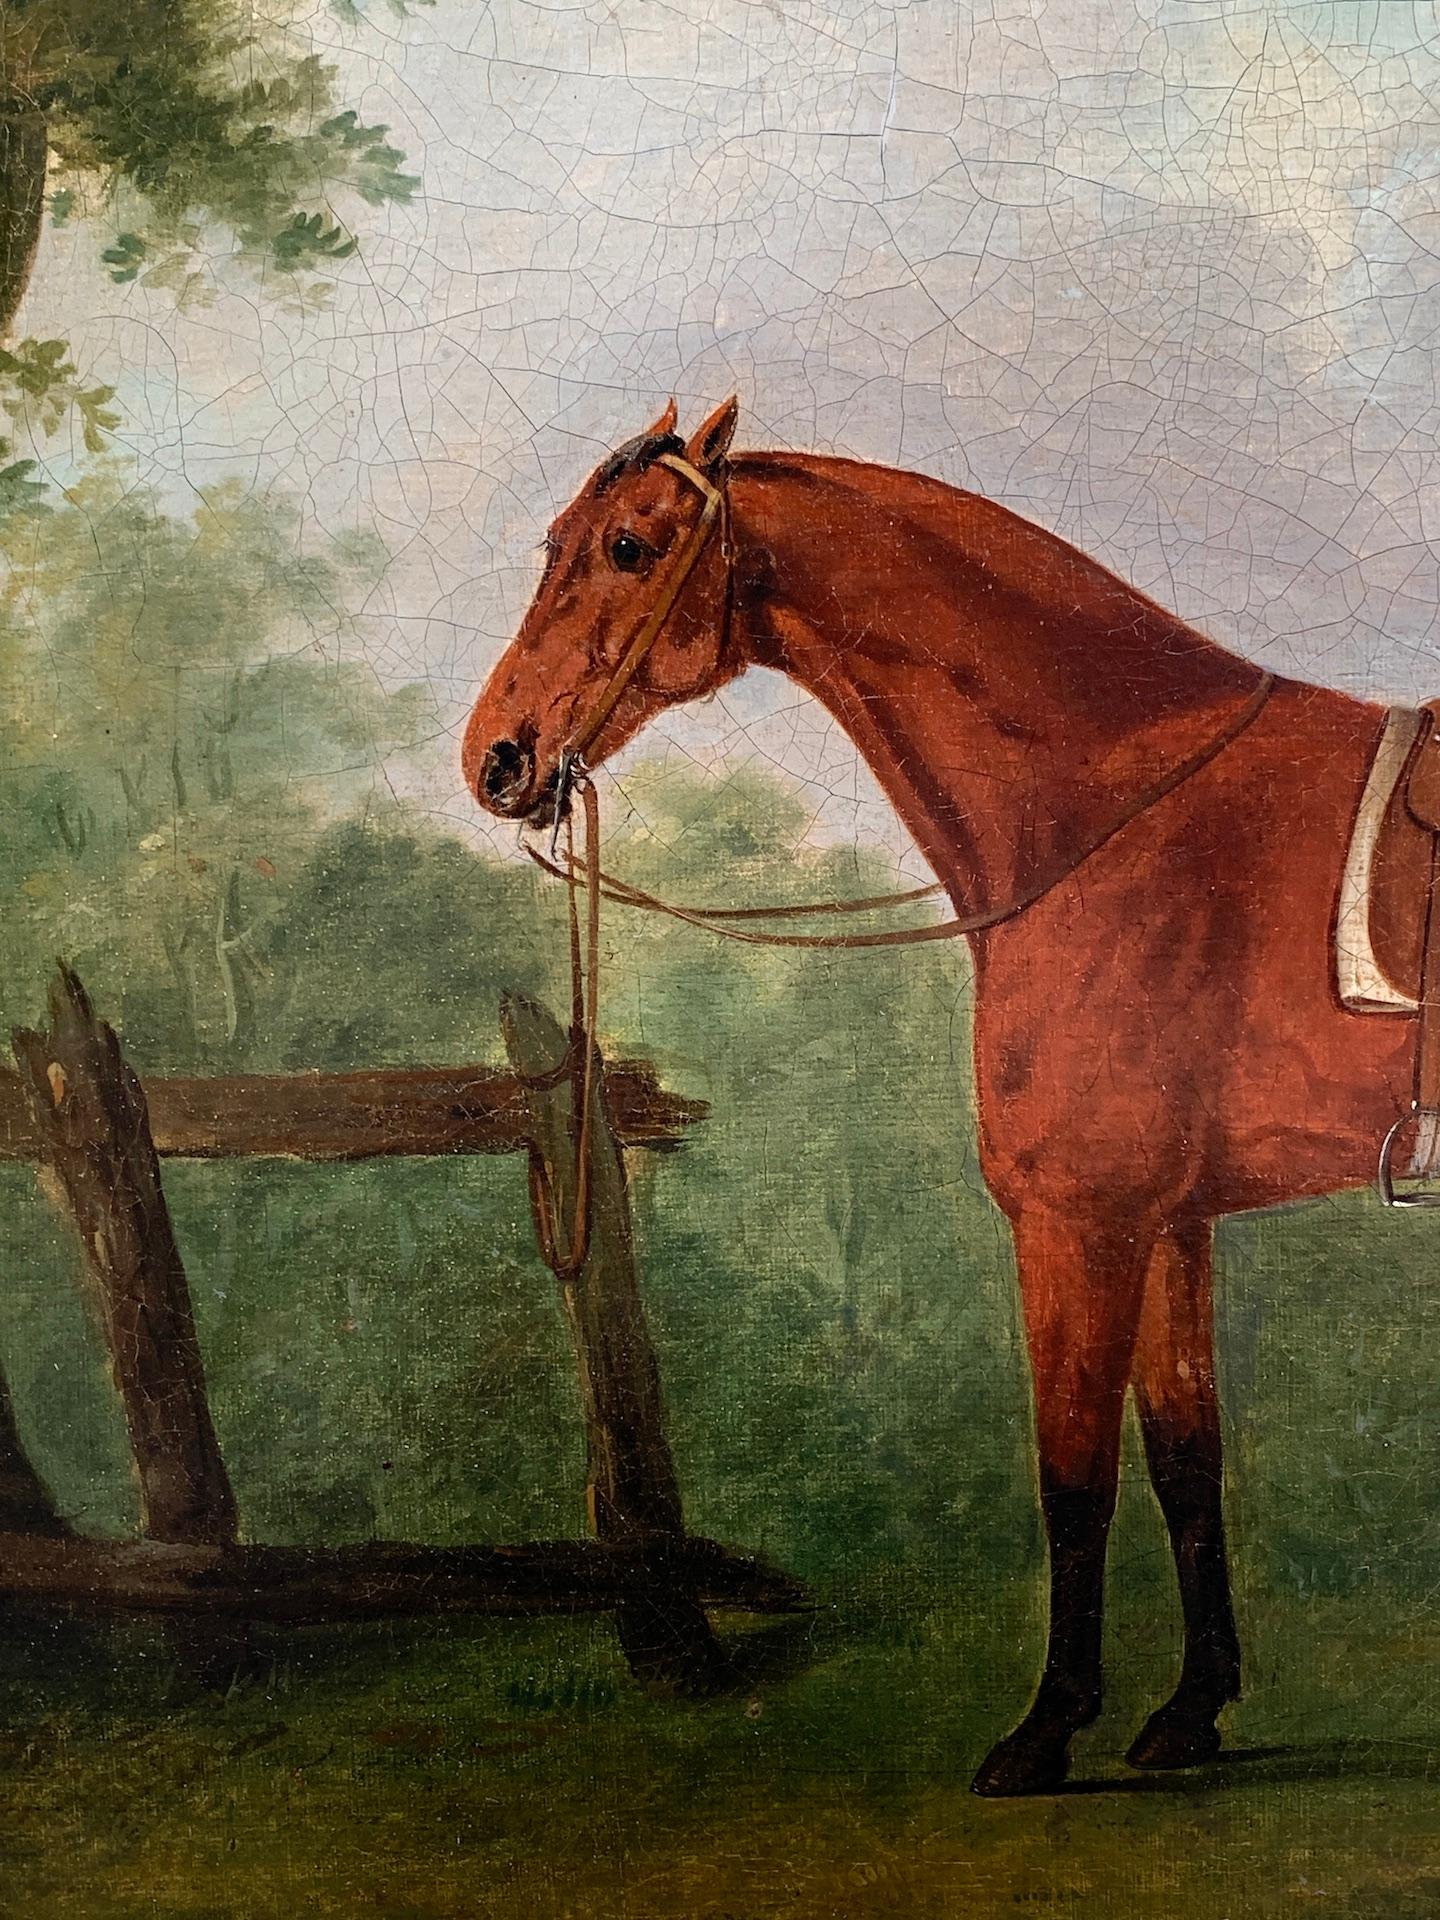 18th century English portrait of the  Horse 'The Baronet' in a landscape 2